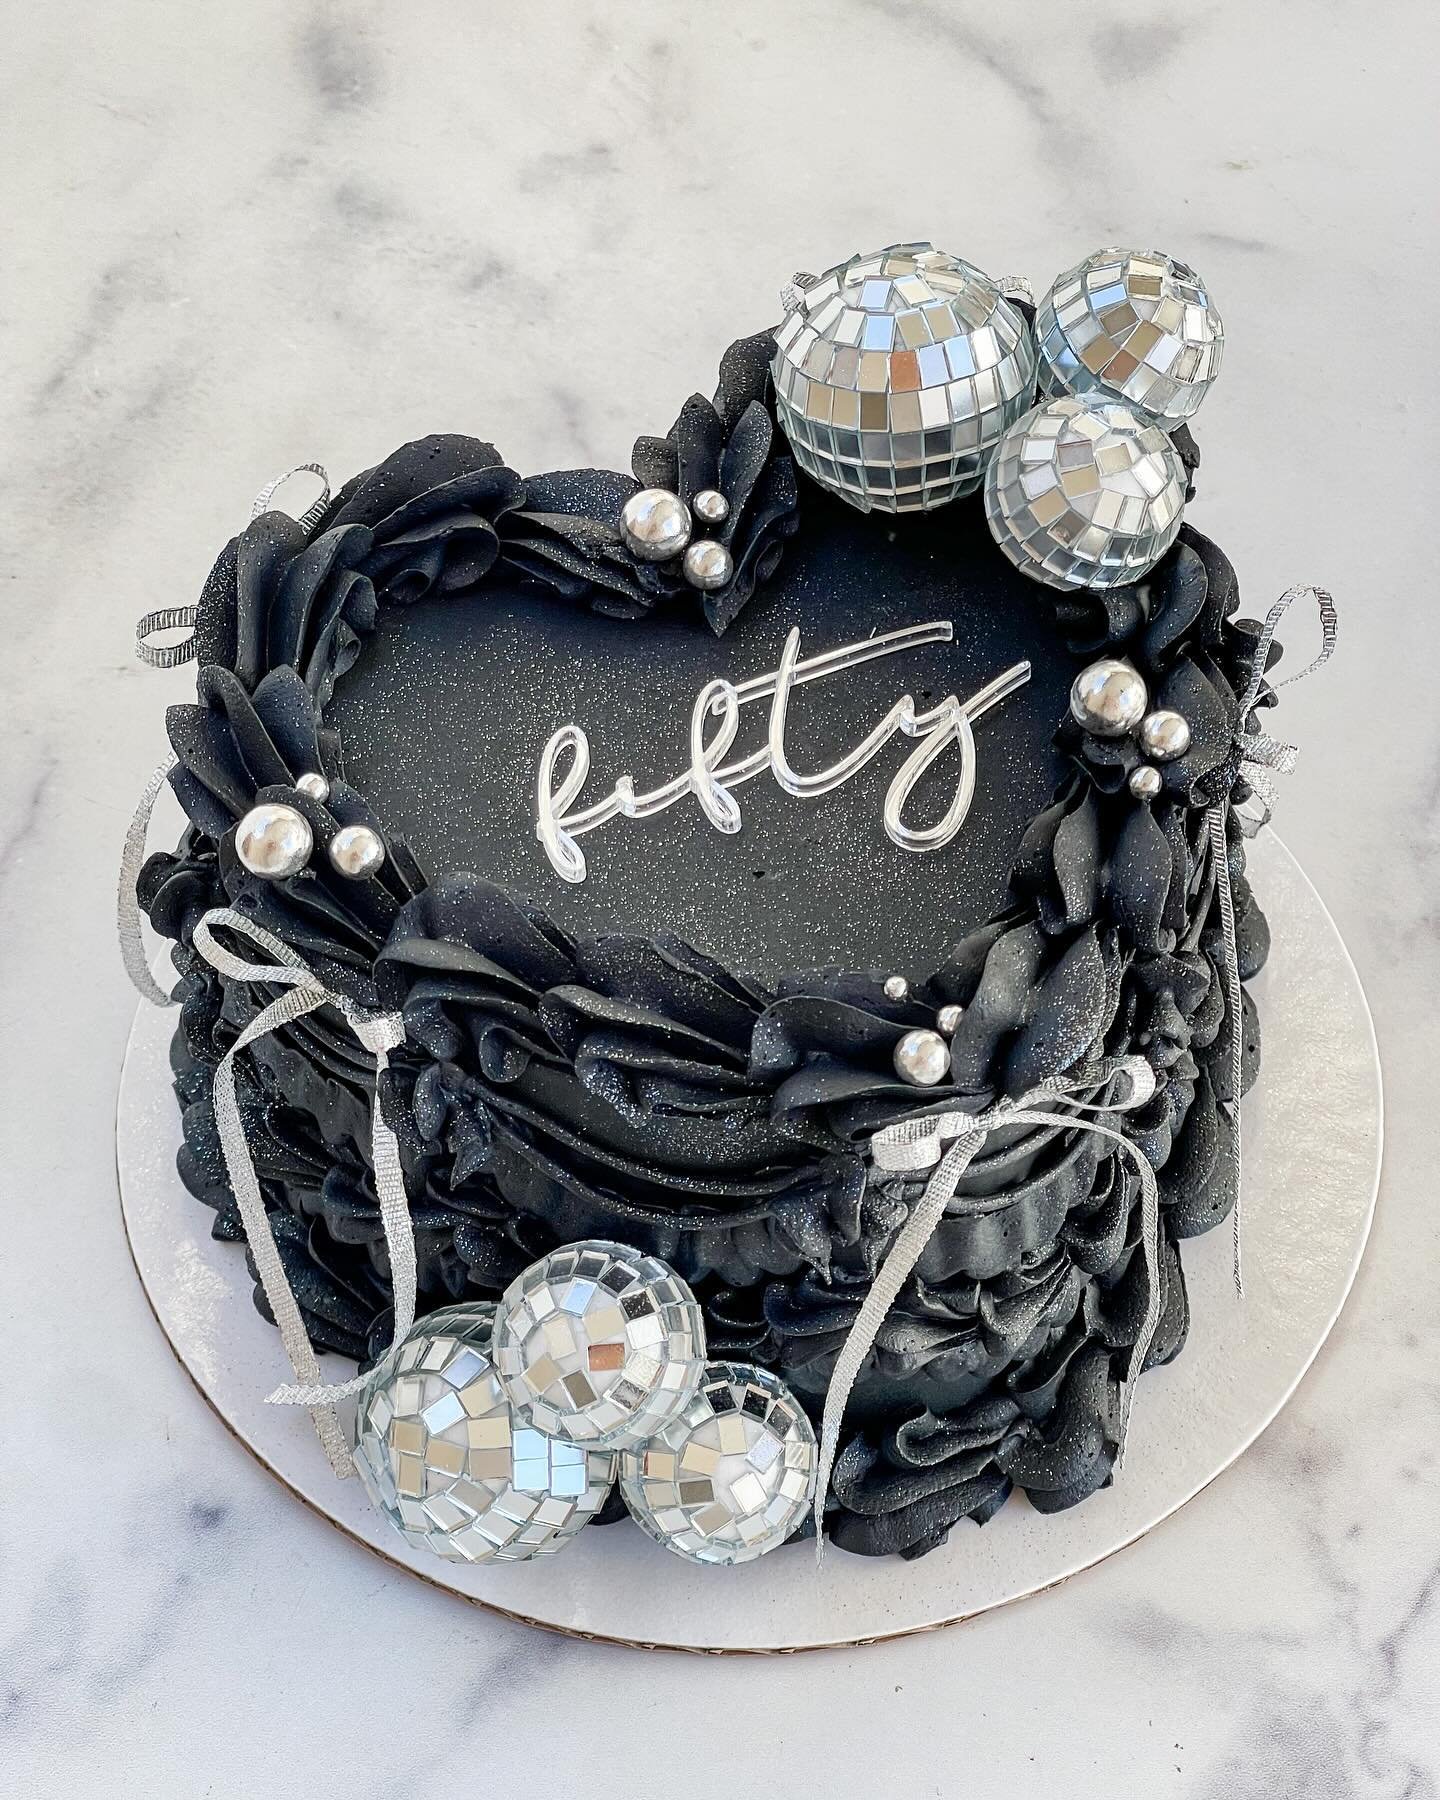 nothing but the best for @the_foodie_board 🖤🪩

&bull; 6&rdquo; two layer heart cake with black buttercream, black piping, edible silver glitter, disco balls, silver bows &amp; @floraldust_ acrylic cake charm ✨
&bull; custom cupcakes with @floraldus